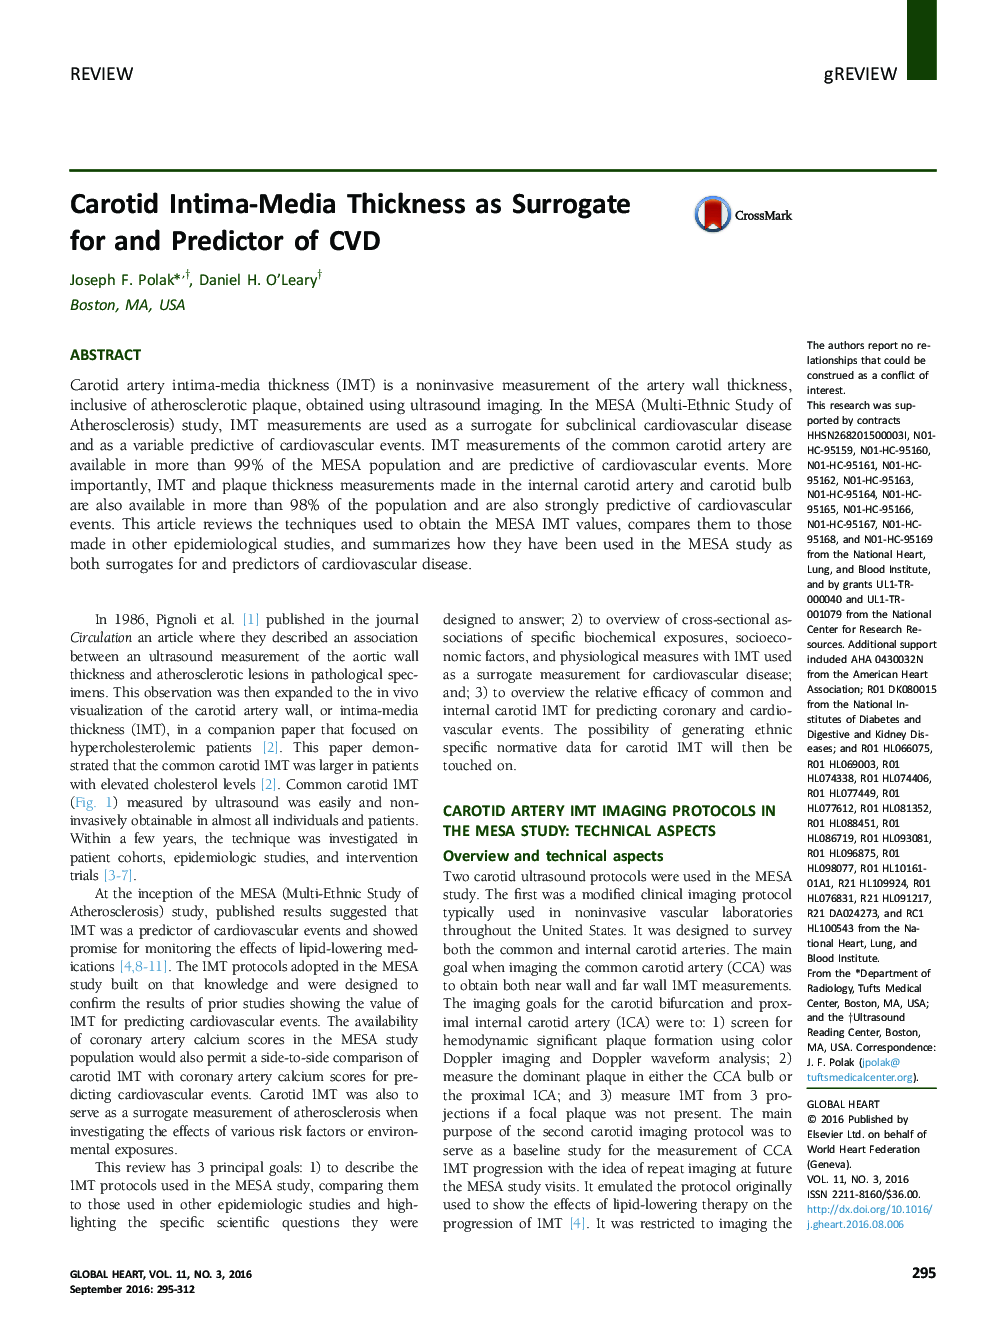 Carotid Intima-Media Thickness as Surrogate for and Predictor of CVD